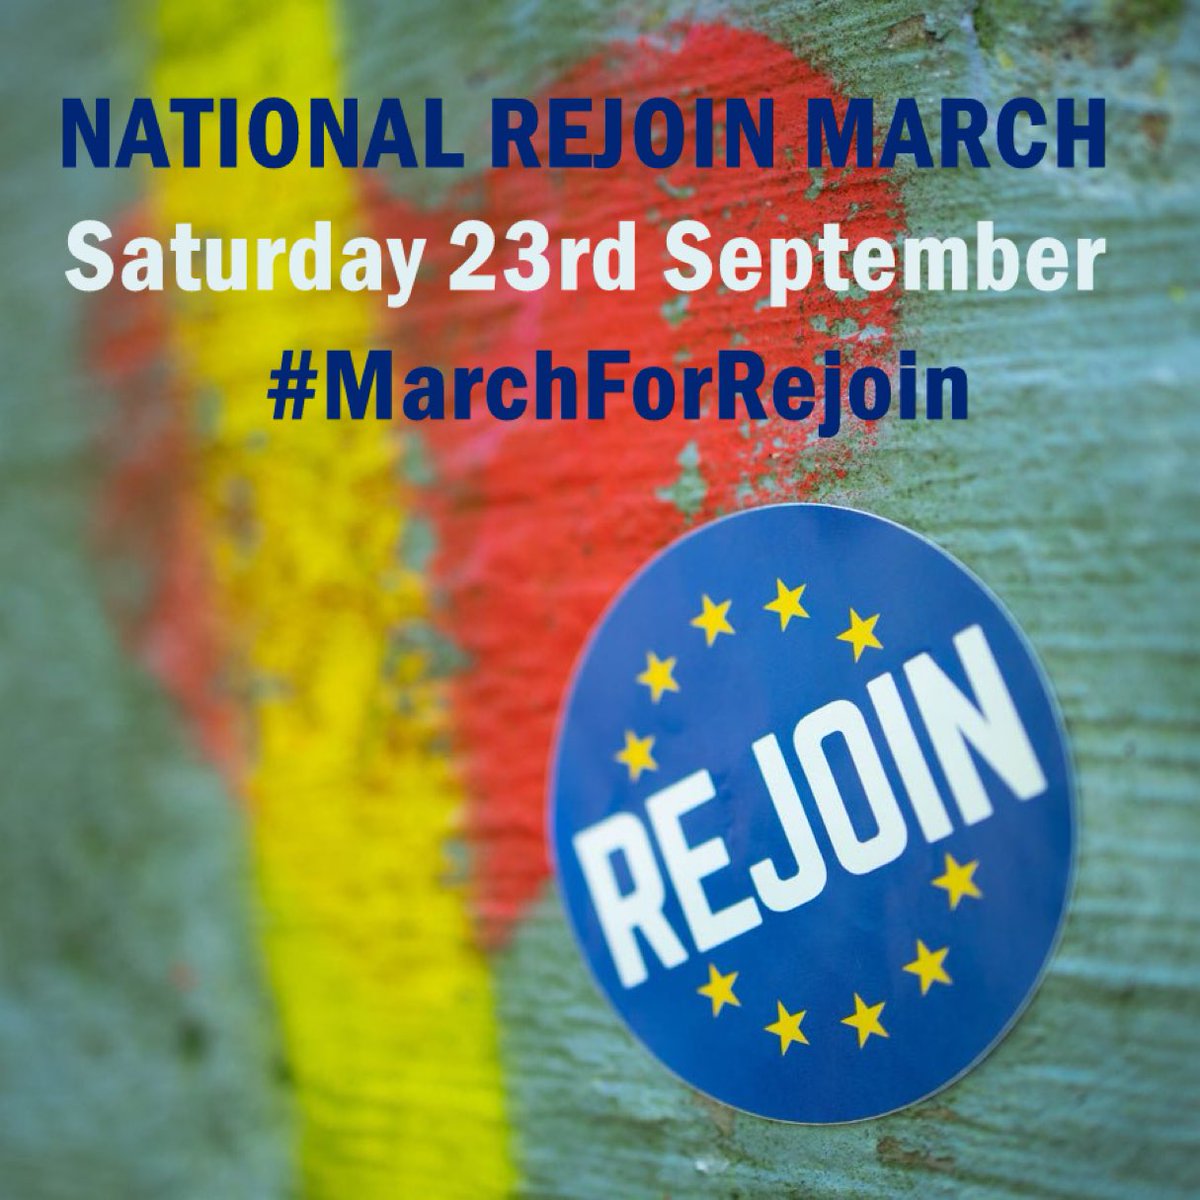 It’s the March to Rejoin🇪🇺 #RejoinMarch today! I hope it’s a brilliant day! There’s some great speakers to listen to this afternoon. I’m sad I won’t be there this year but let’s keep up with our campaign to #RejoinEU & end this #BrexitShambles